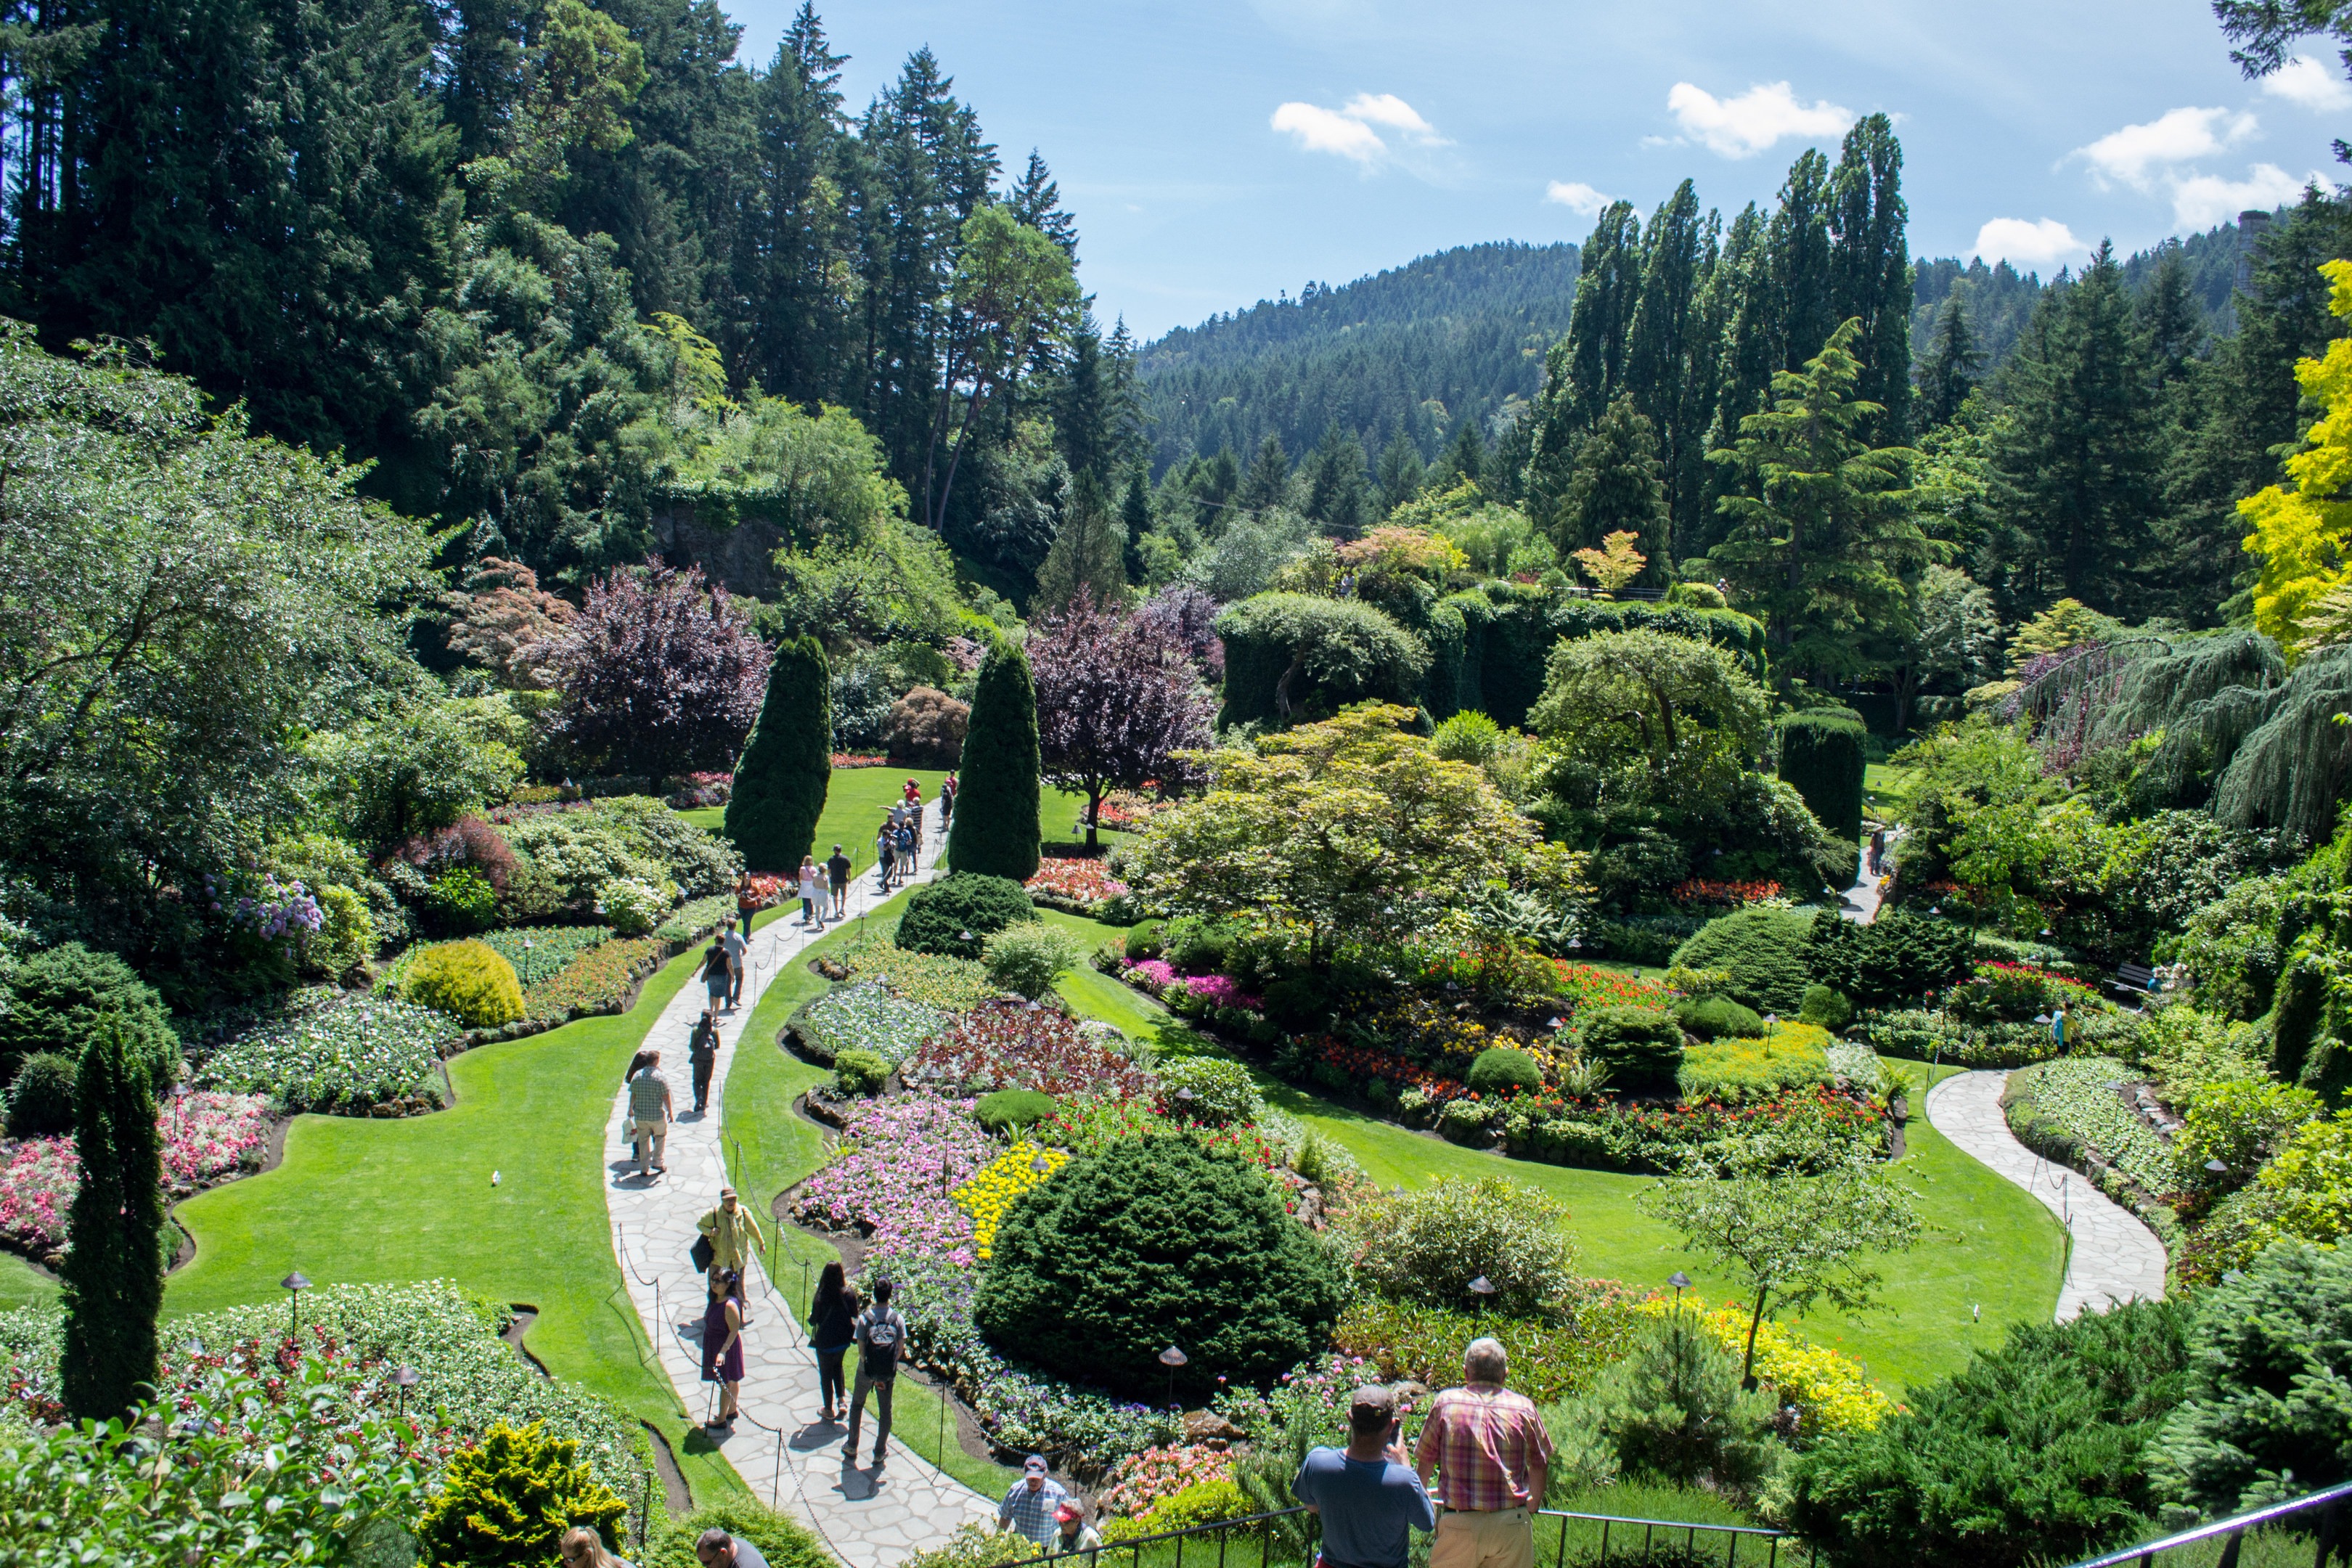 Butchart Gardens in Victoria, BC Visitor Travel Guide & Trip Planner